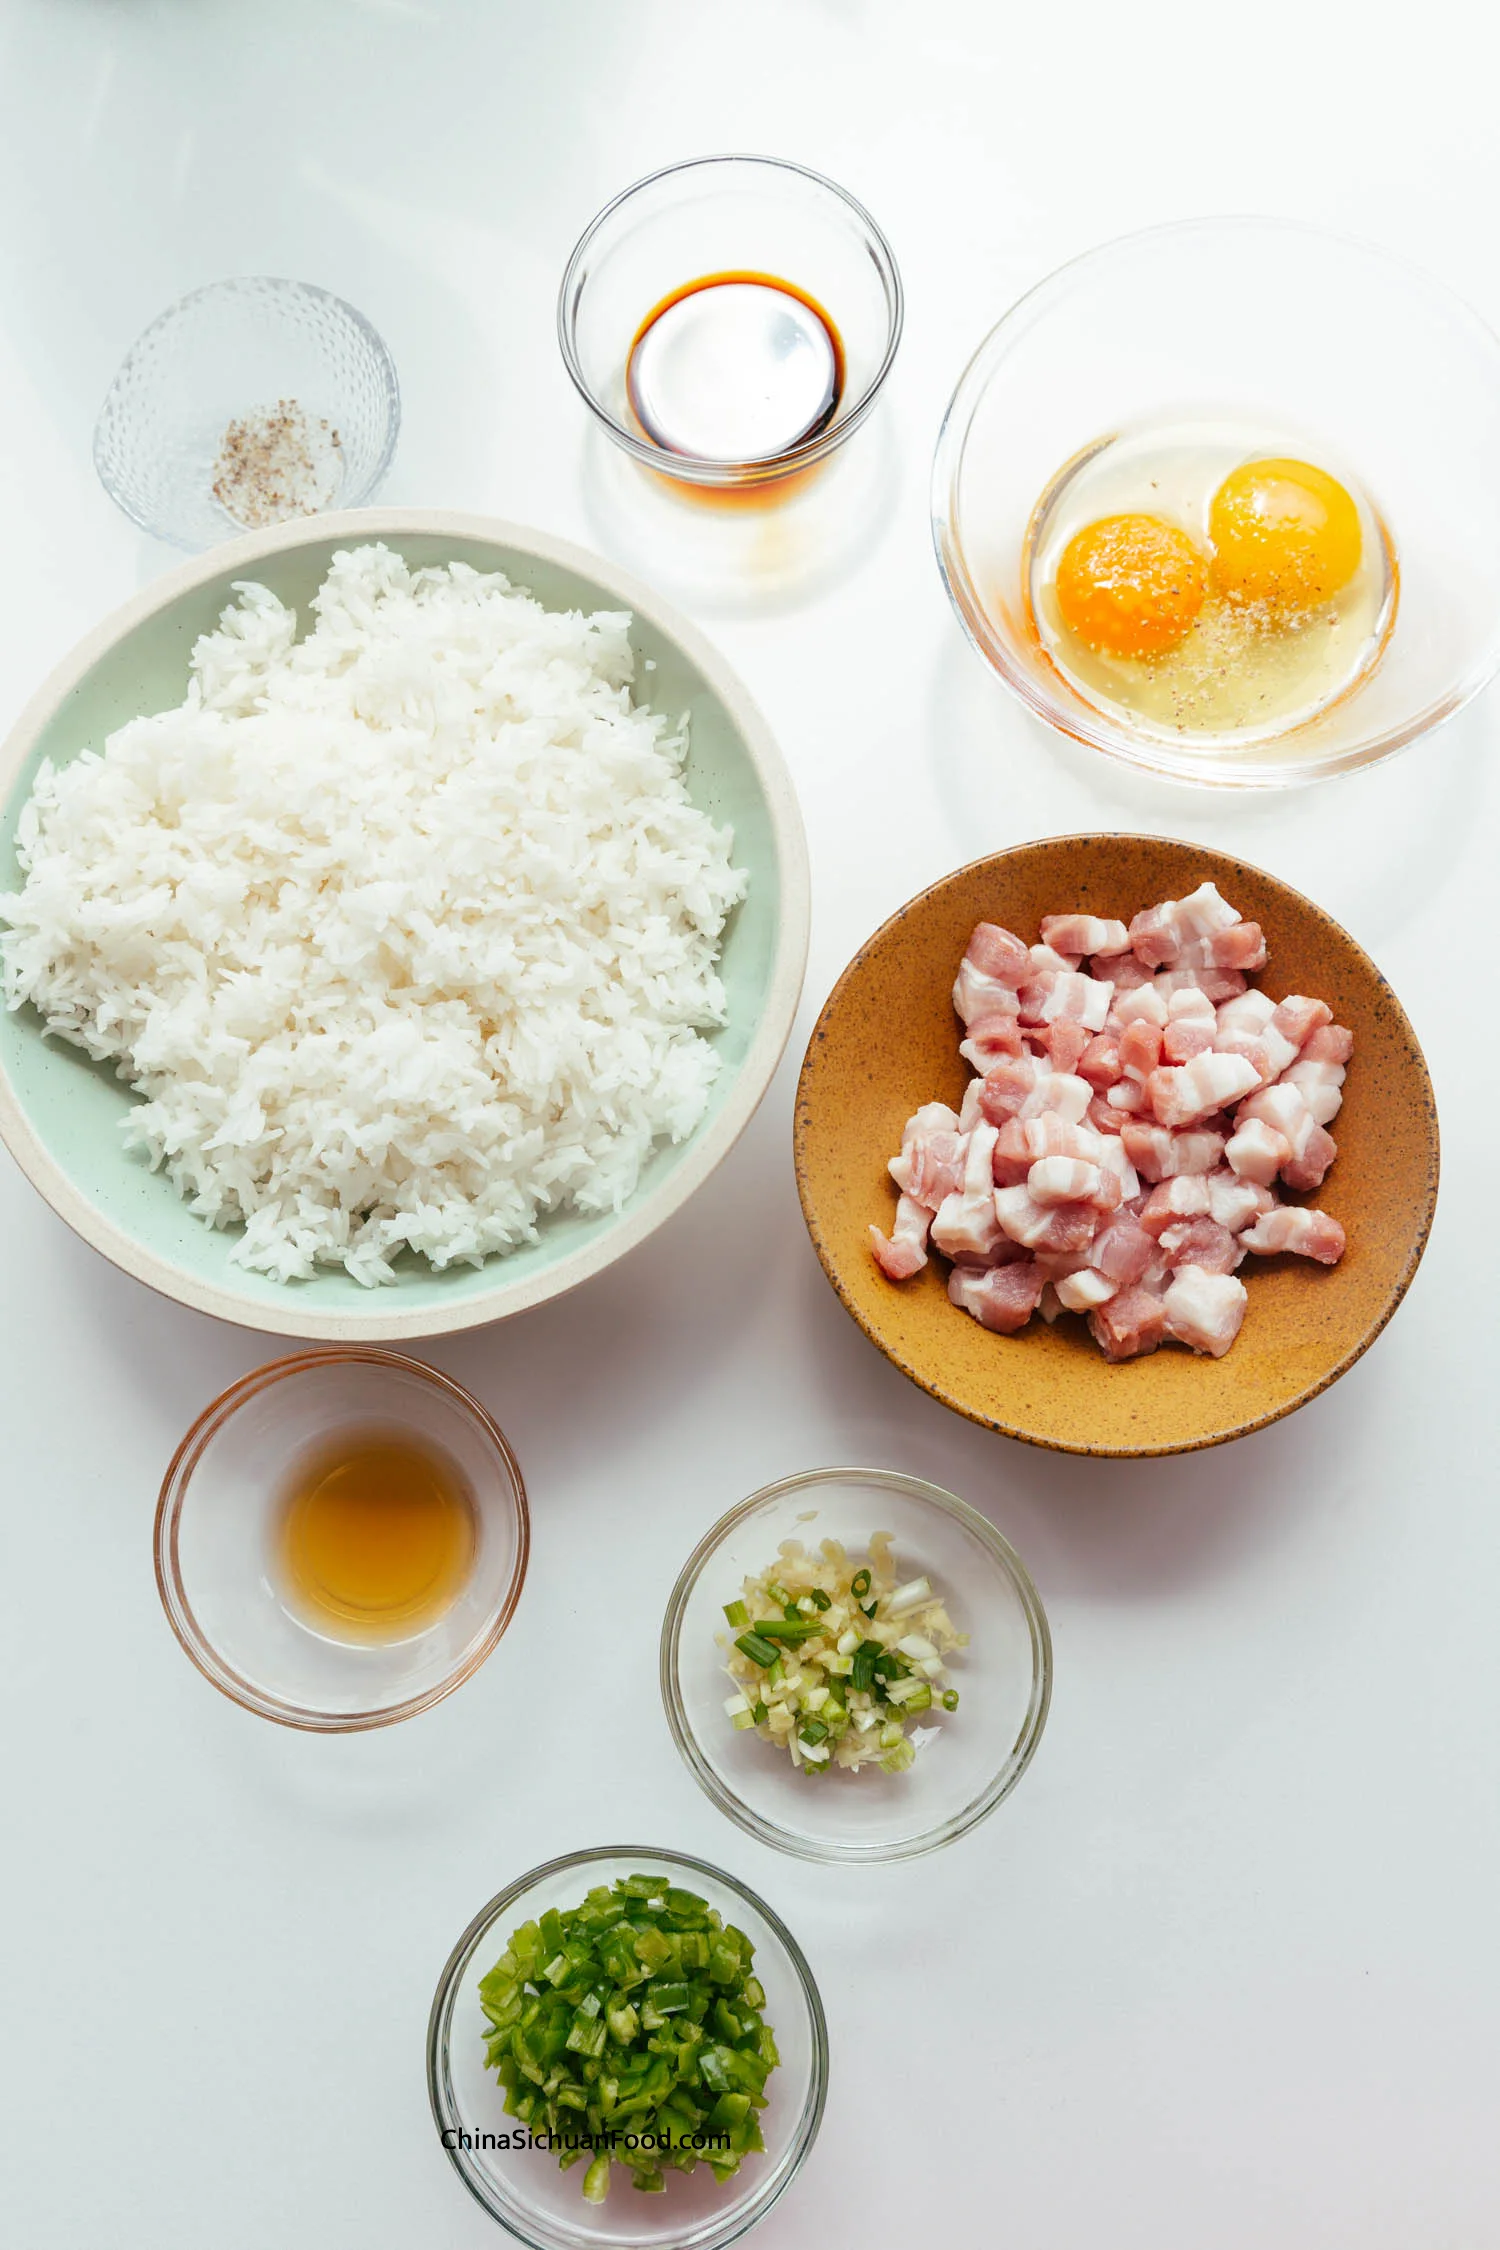 pork belly fried rice |chinasichuanfood.com